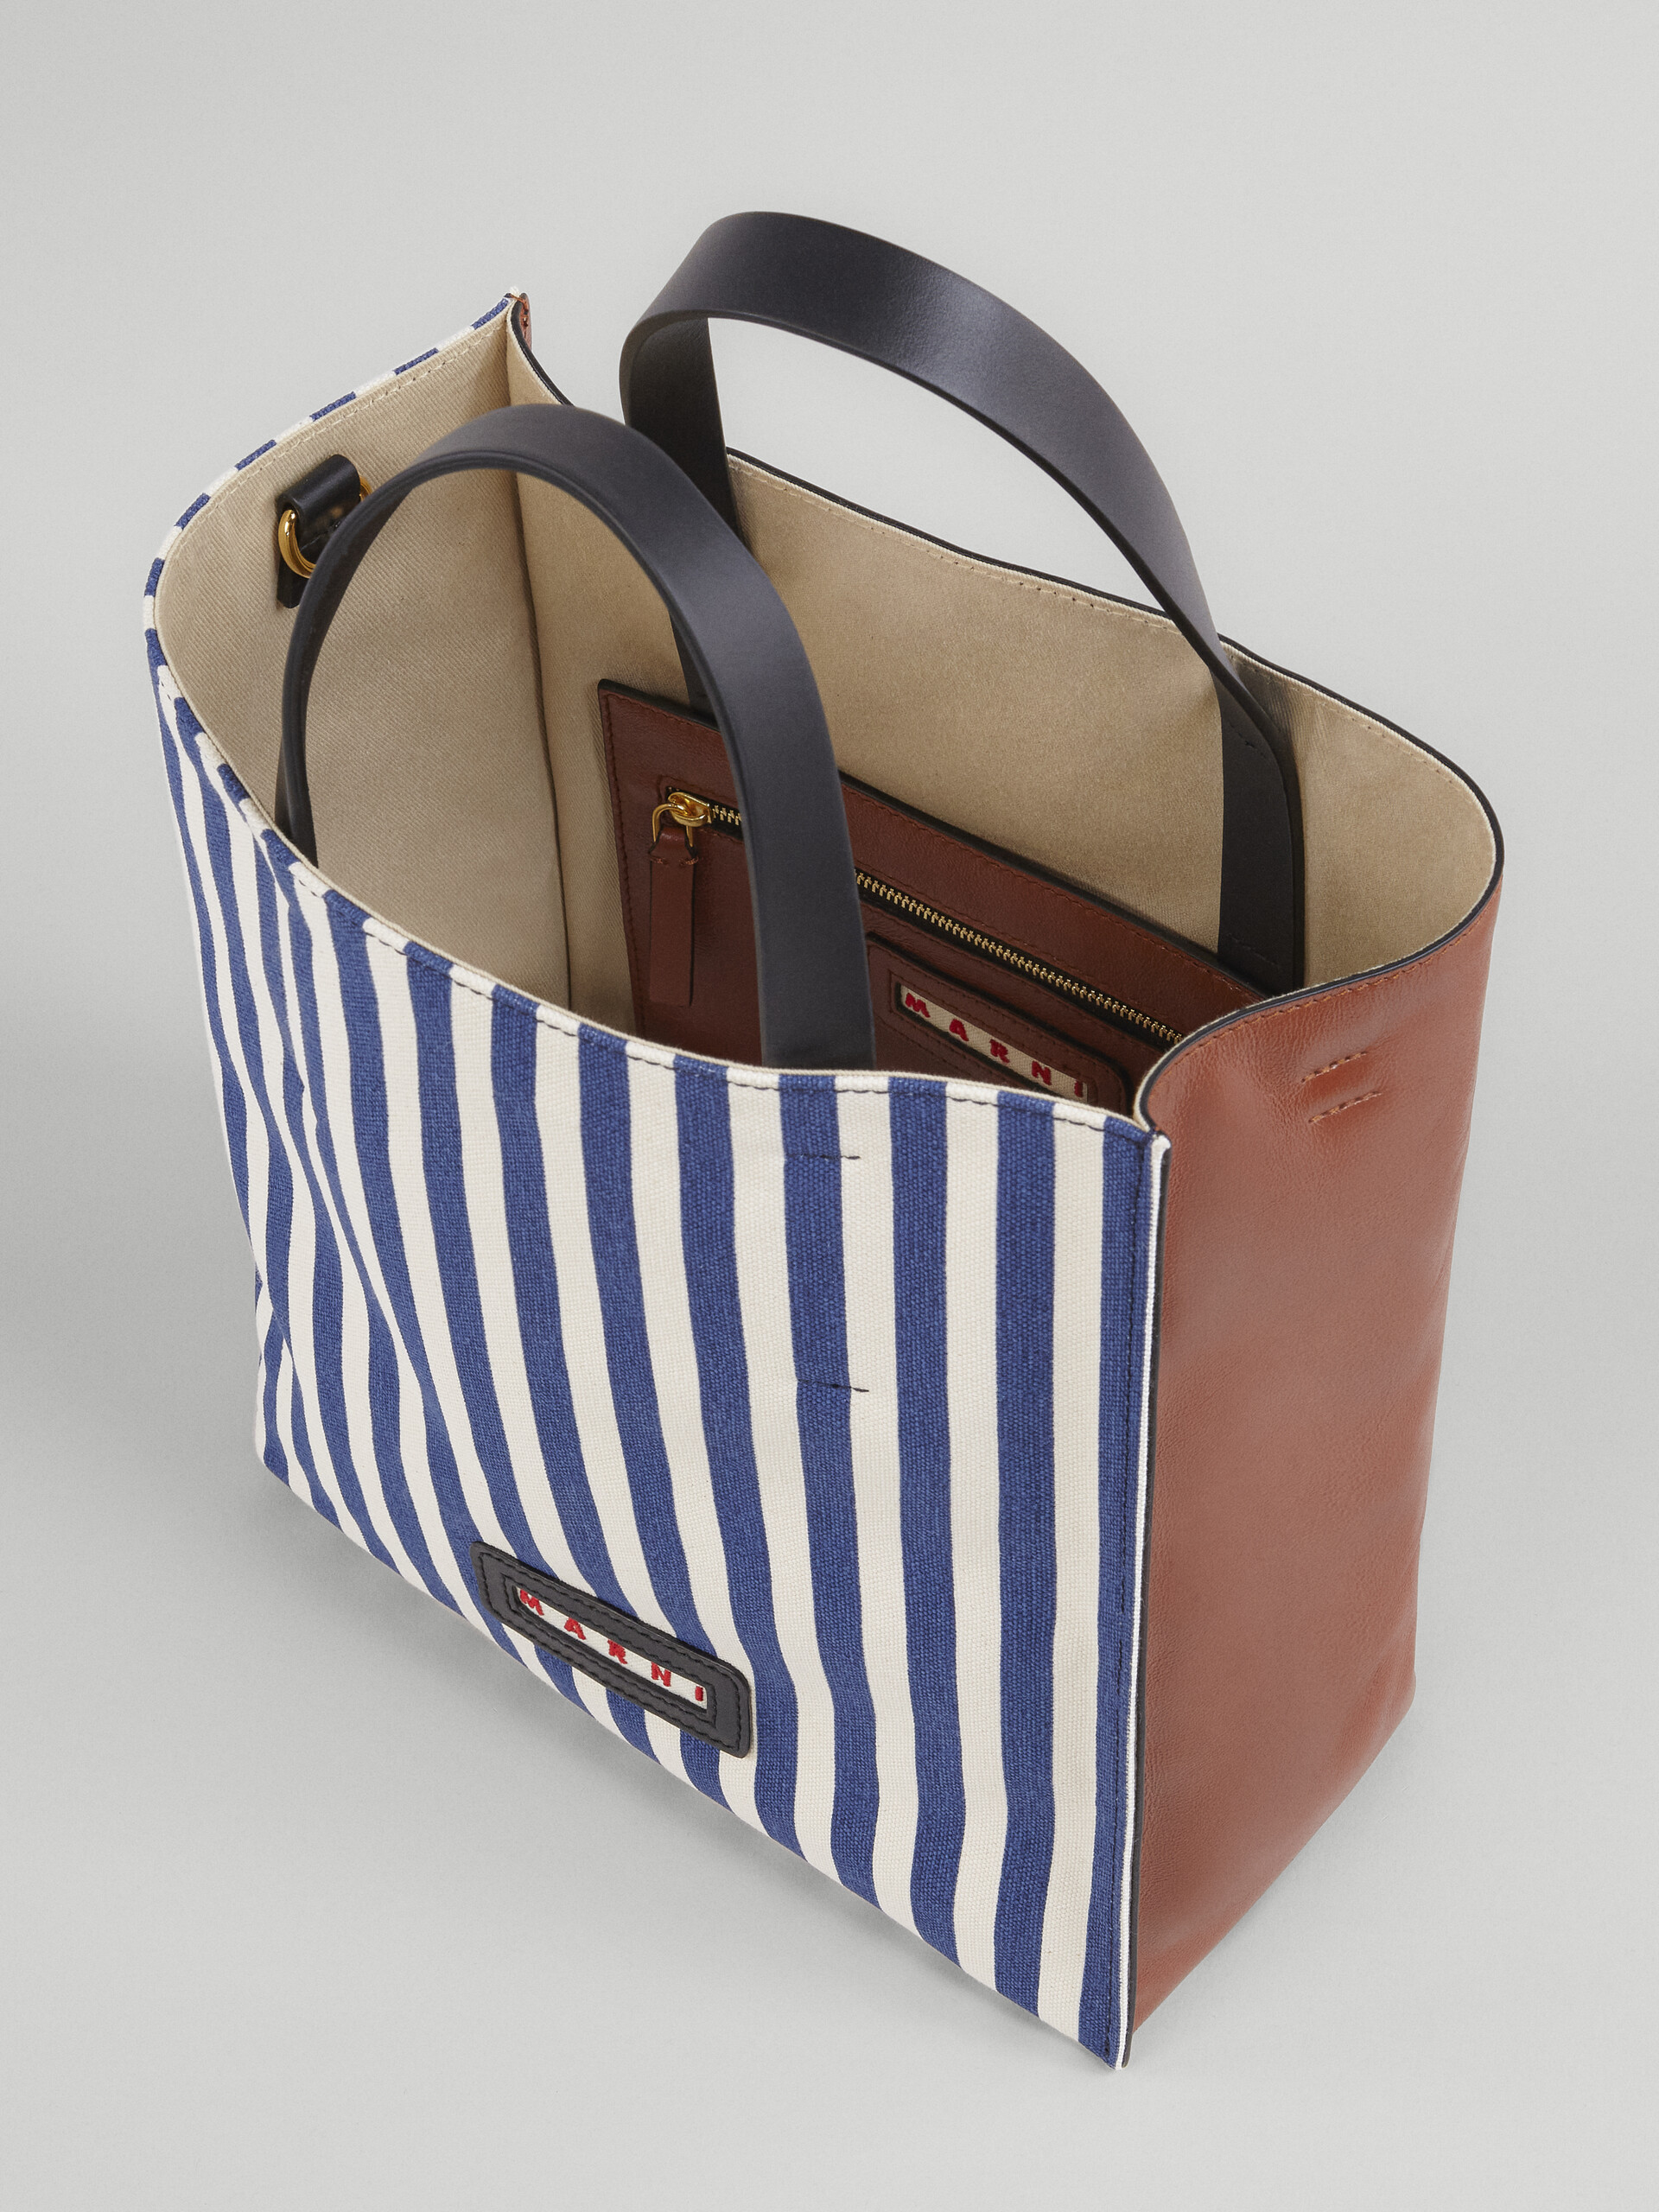 MUSEO SOFT small bag in blue striped canvas - Shopping Bags - Image 4